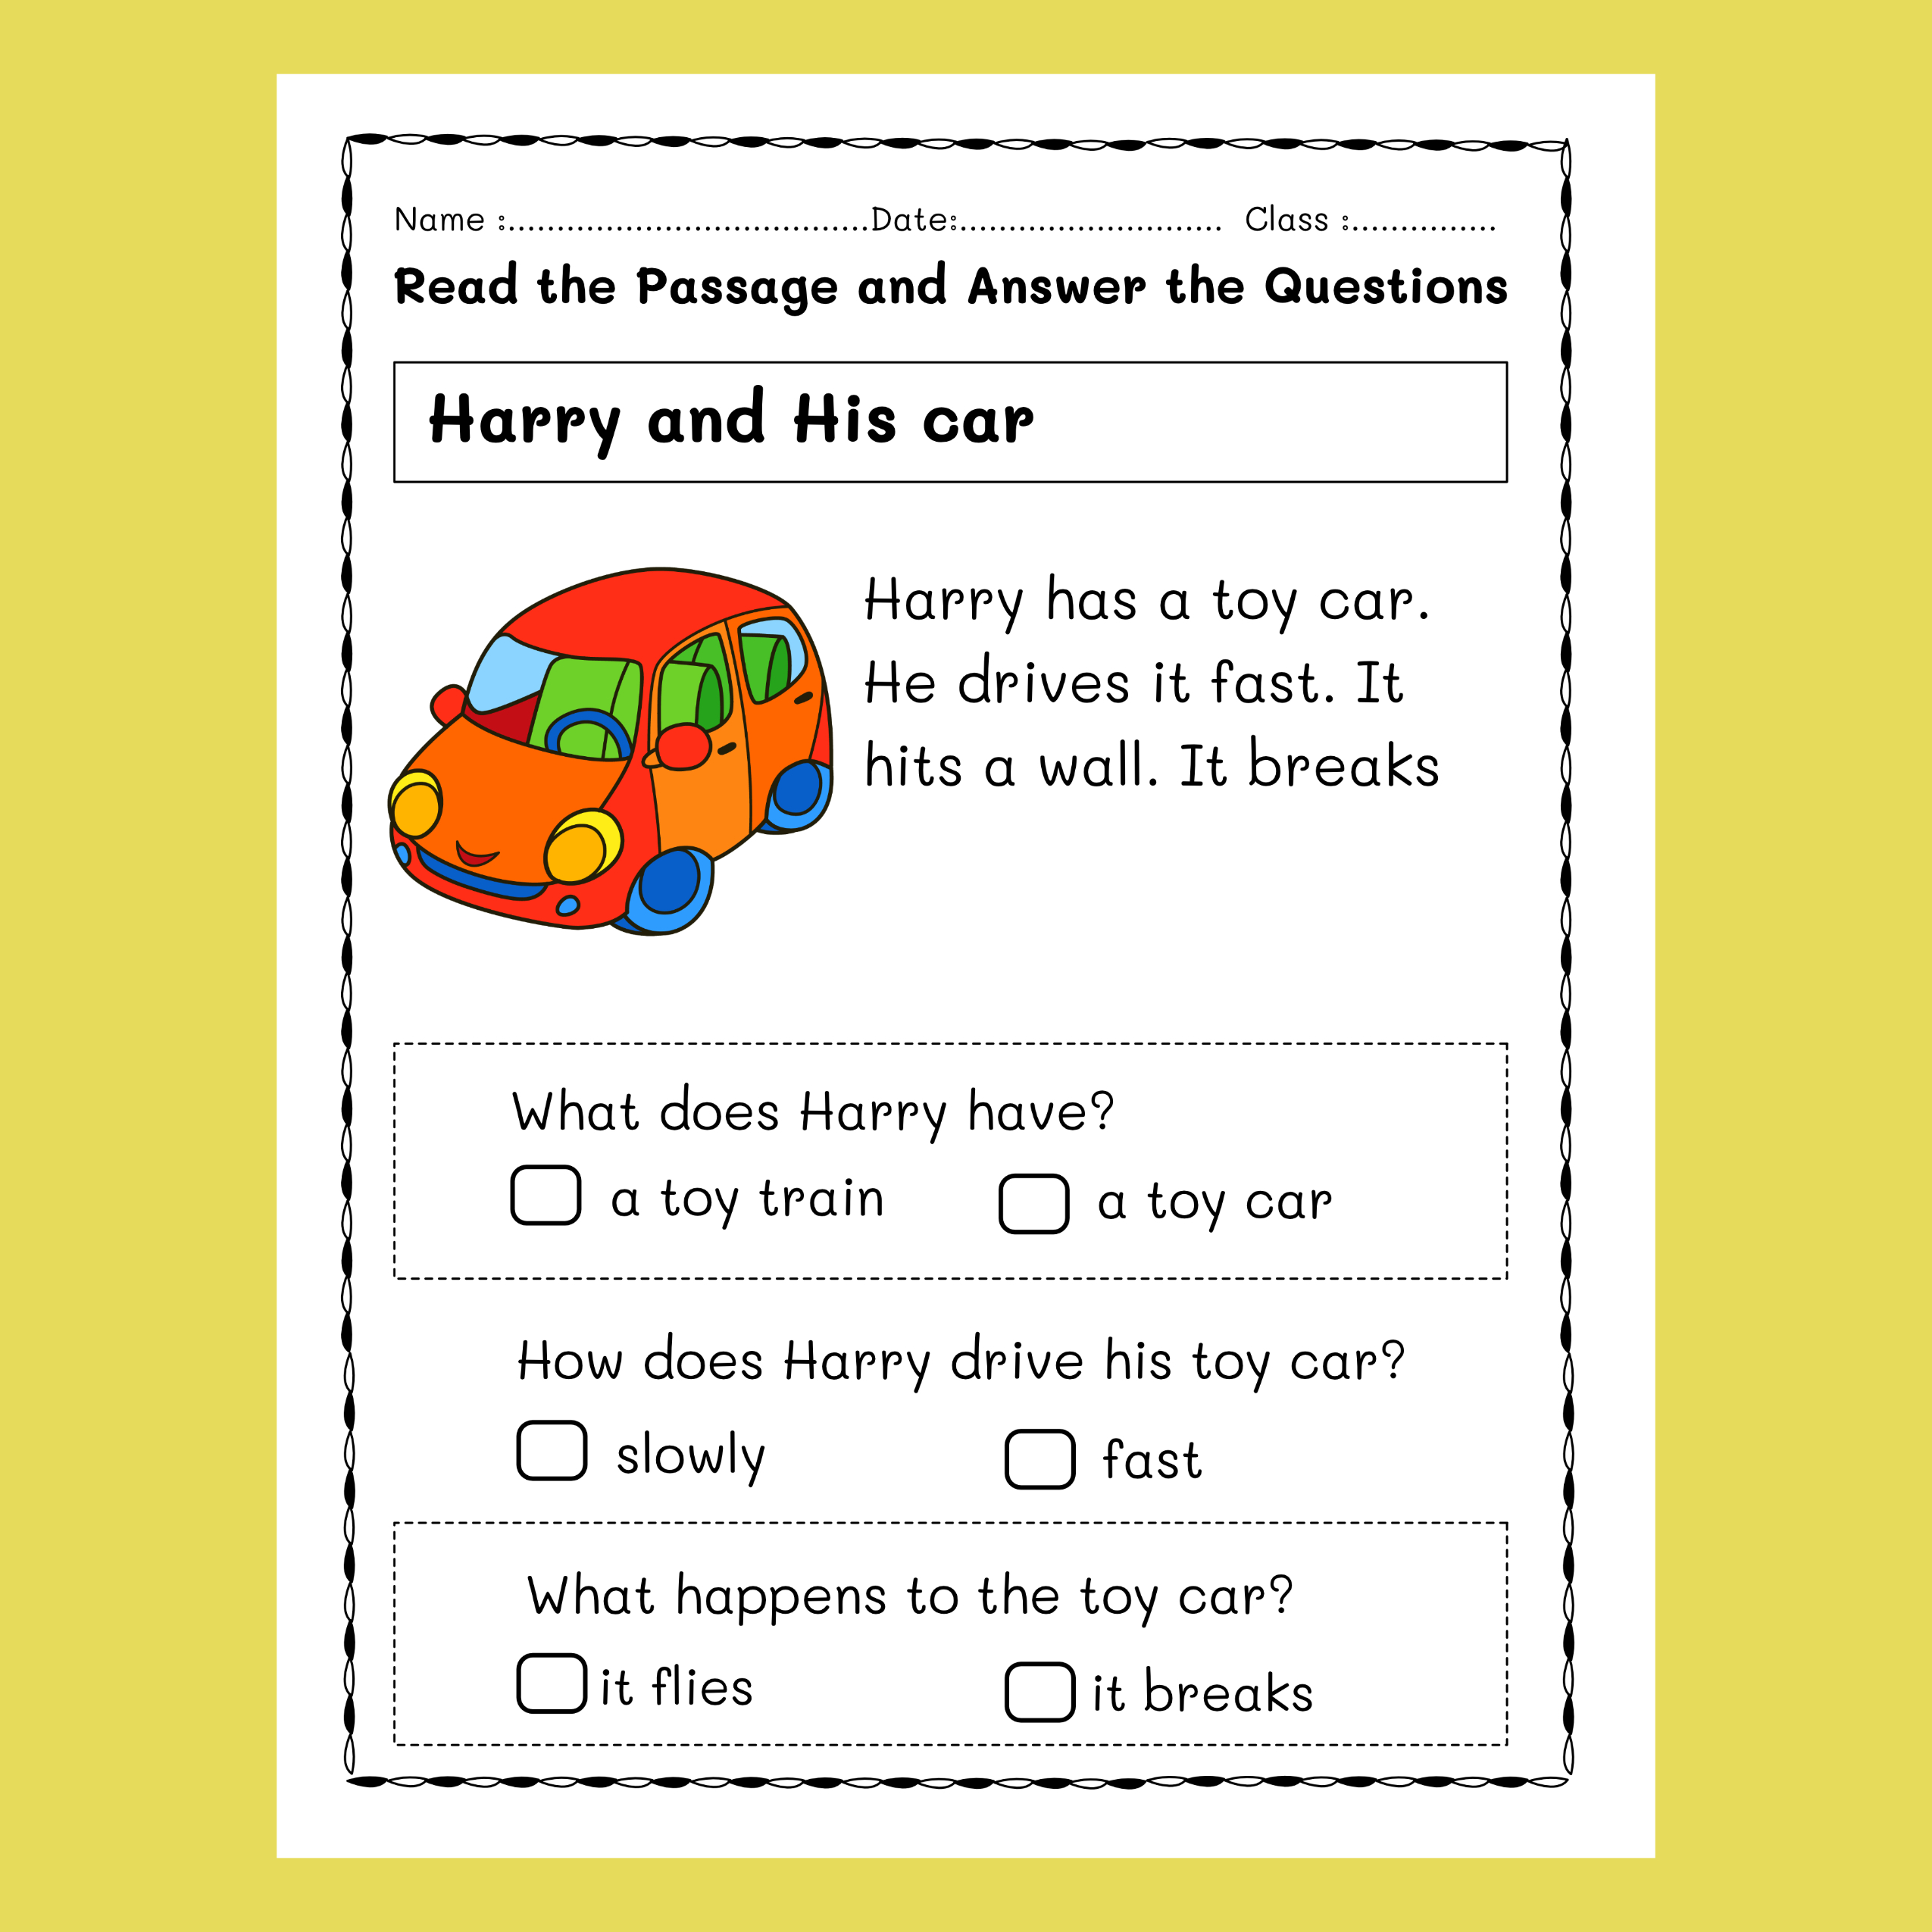 Reading Comprehension Passages for Kindergarten – Grade 1 who are learning to read and comprehend simple texts